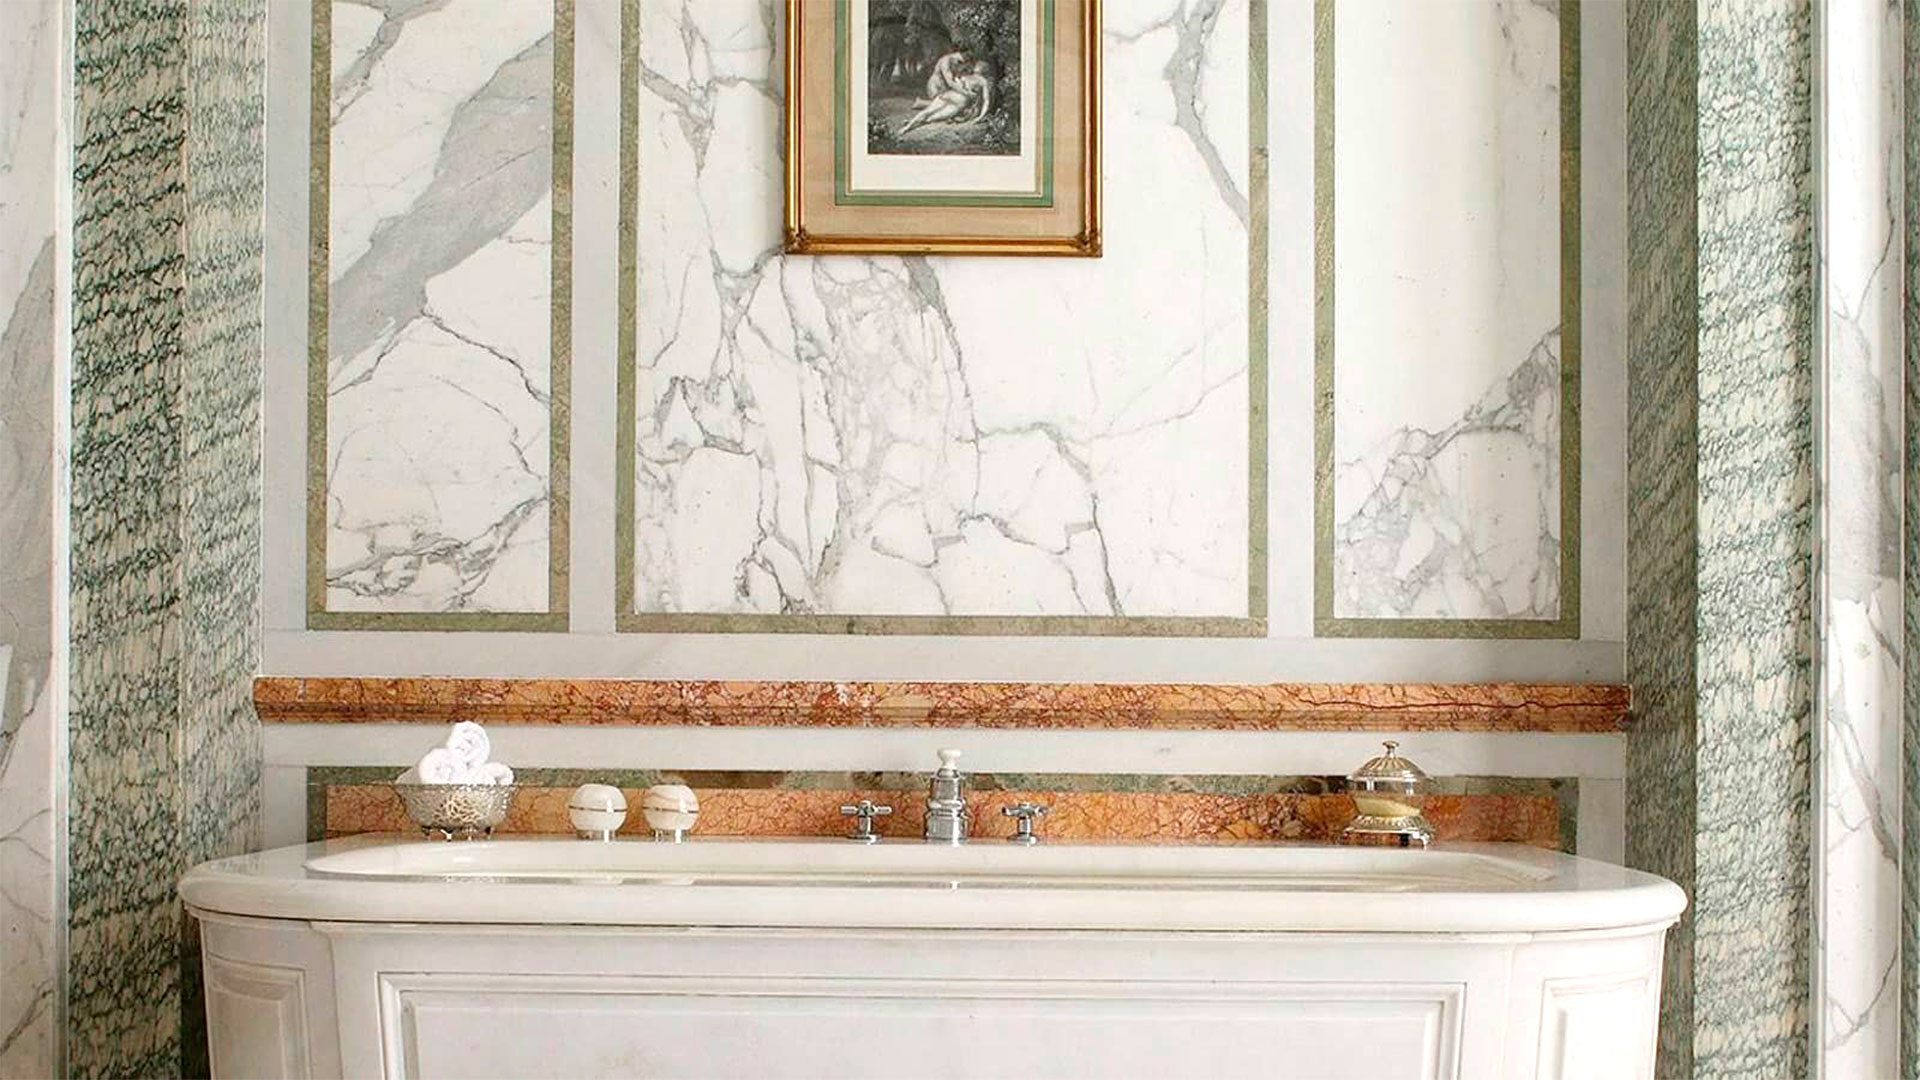 The luxurious bathtub in the bathroom of the room where Robert De Niro, his partner and his daughter are staying